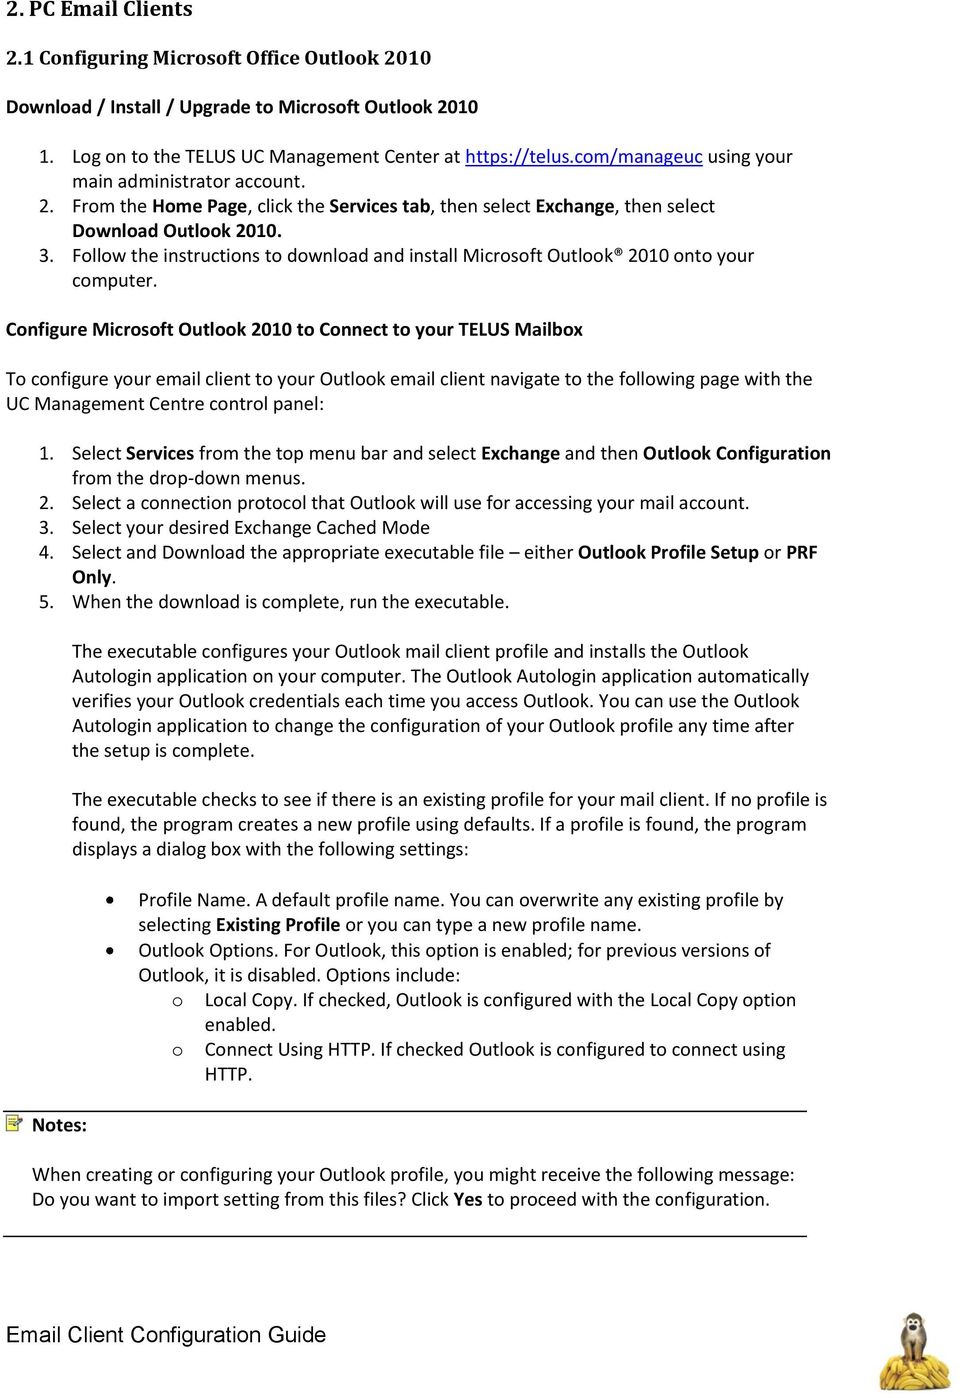 Follow the instructions to download and install Microsoft Outlook 2010 onto your computer.